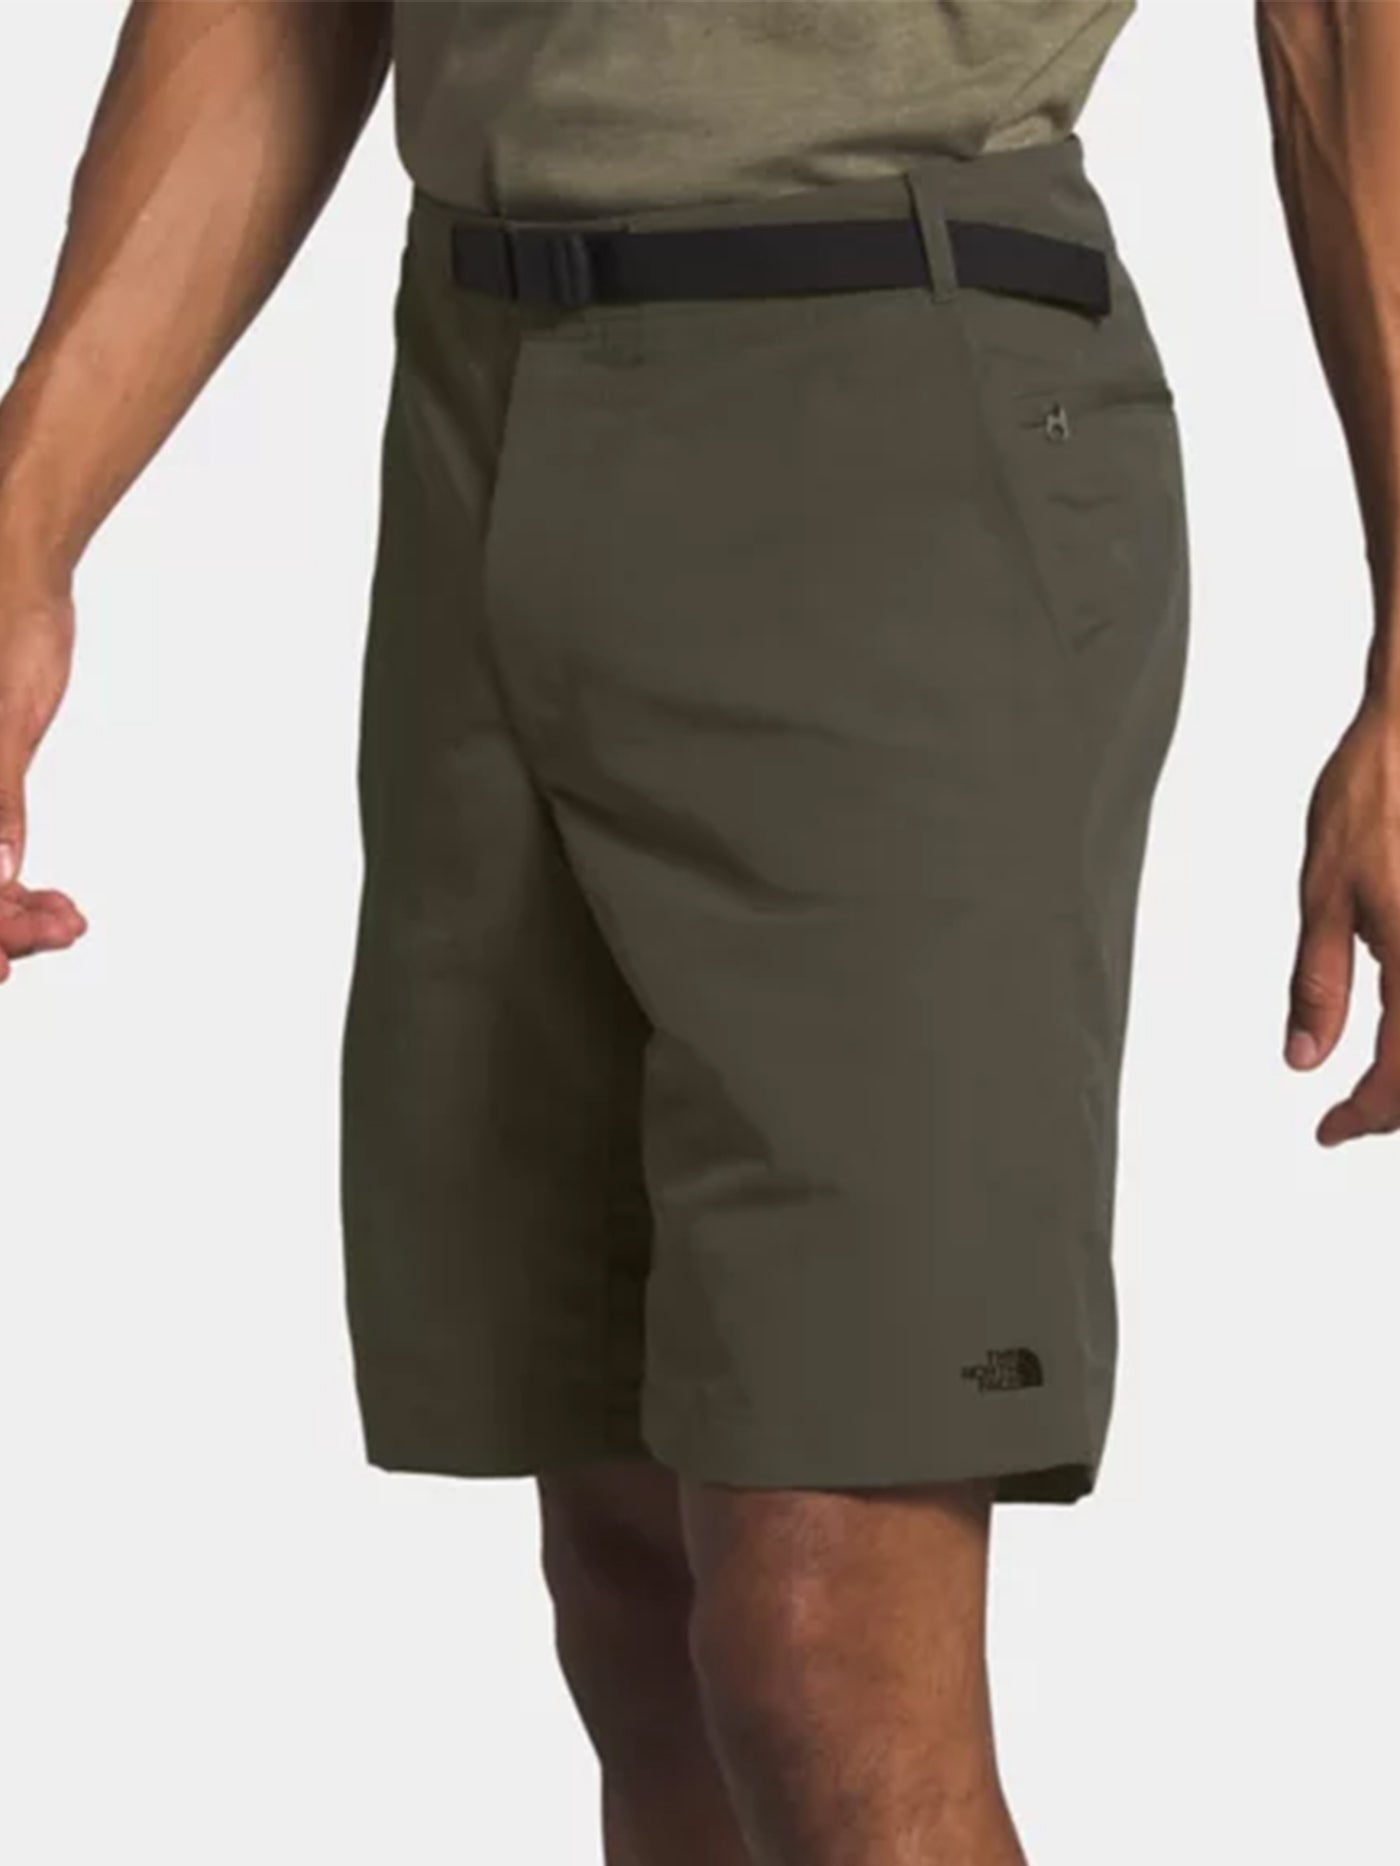 The North Face Paramount Trail Shorts